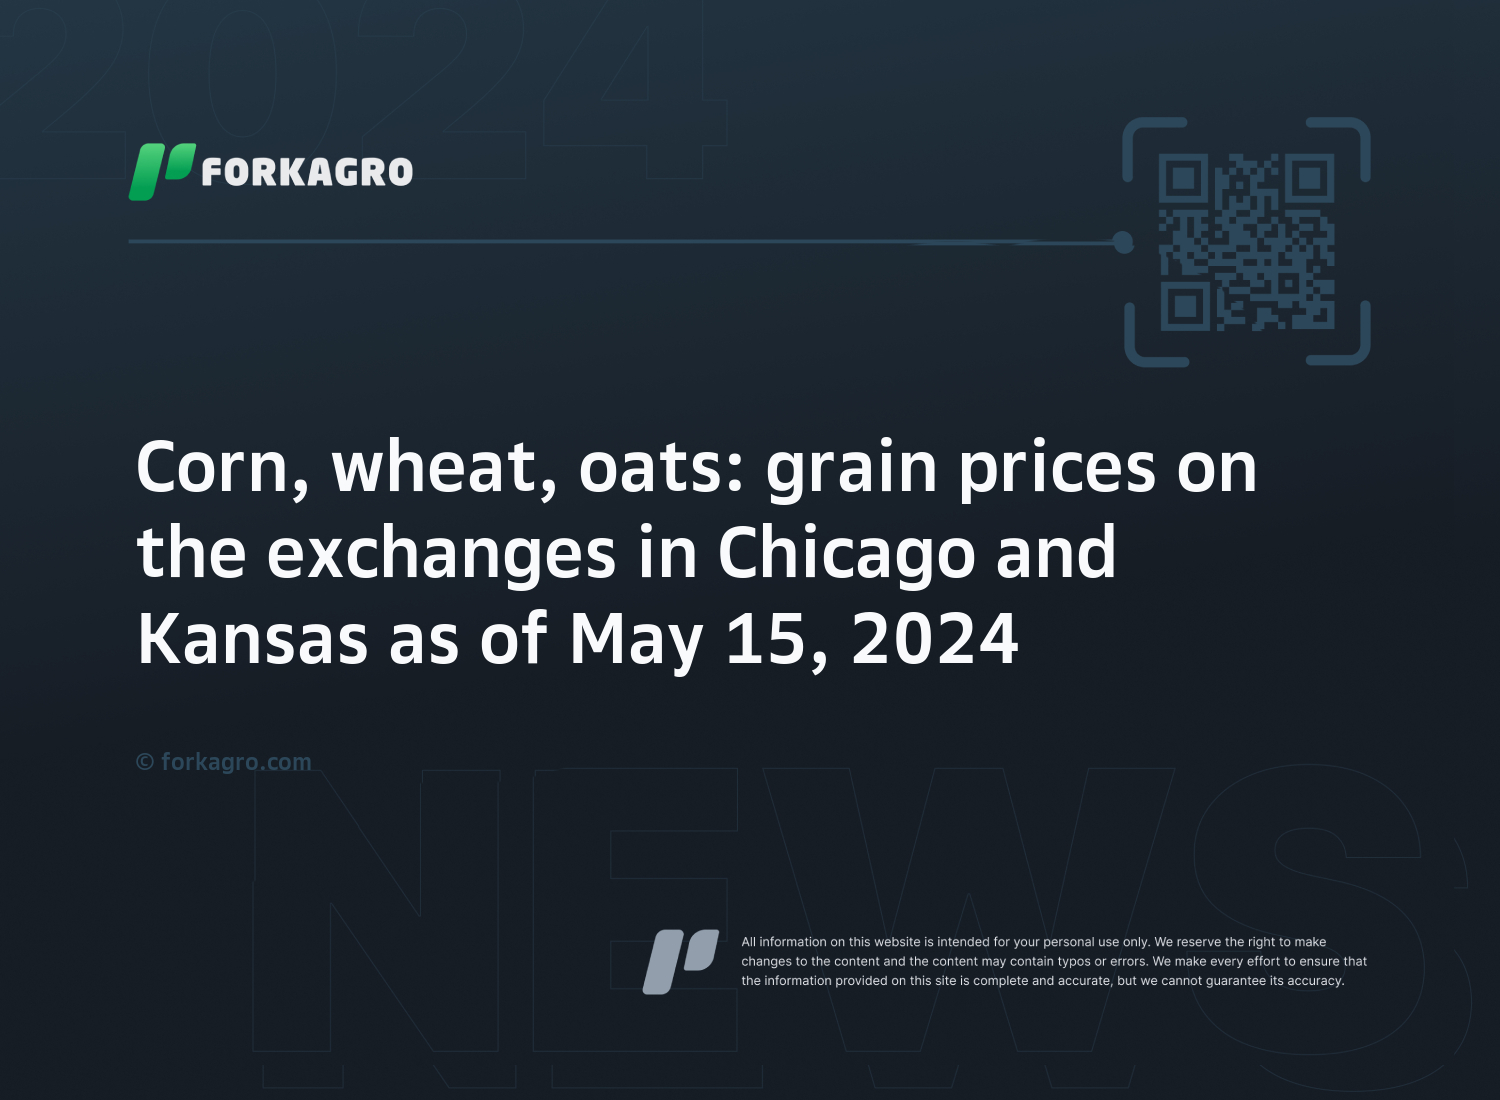 Corn, wheat, oats: grain prices on the exchanges in Chicago and Kansas as of May 15, 2024